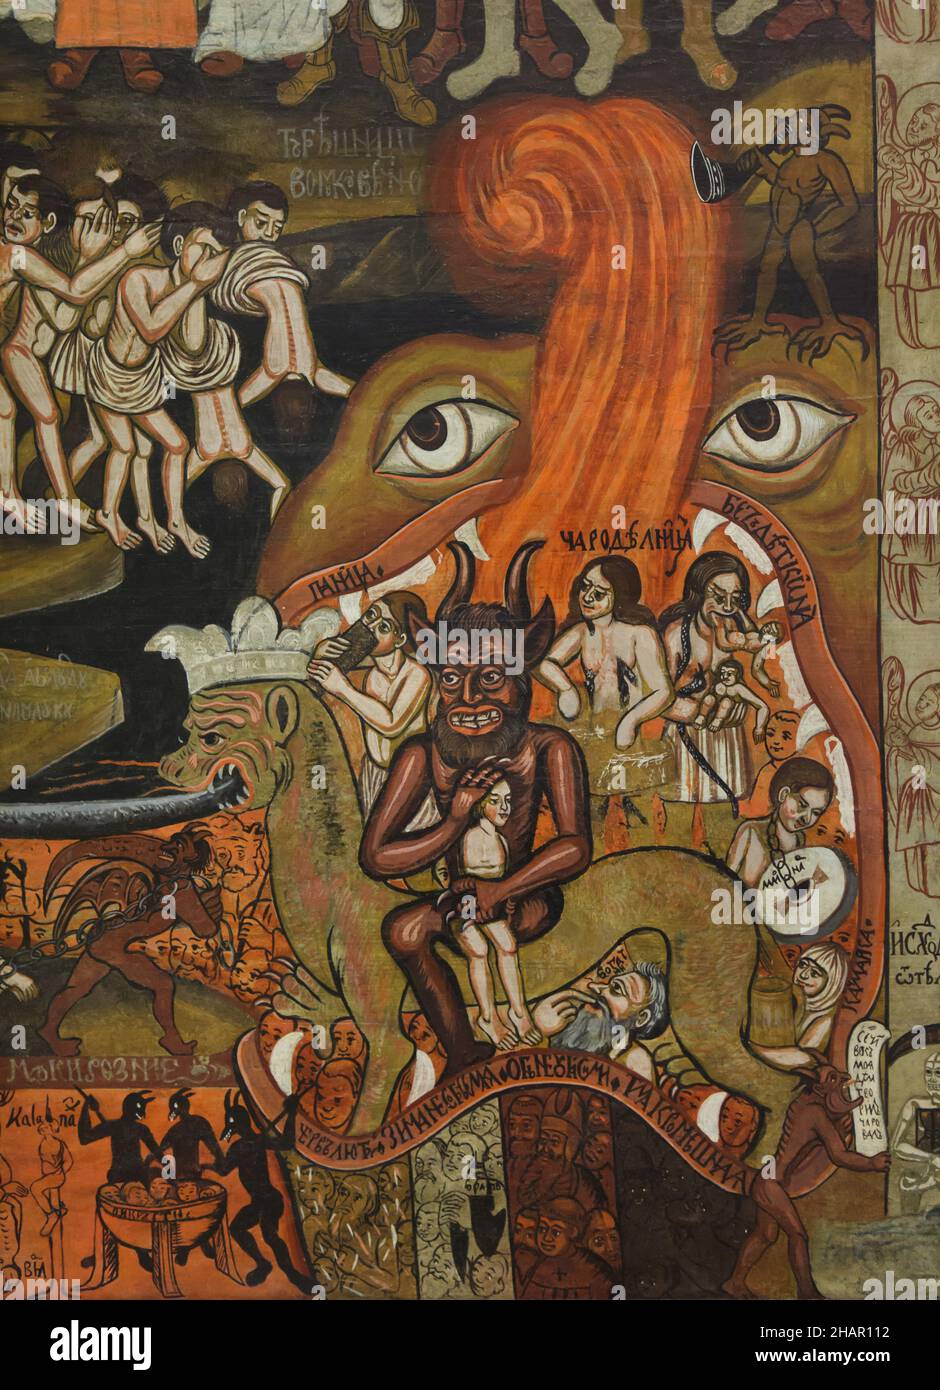 Satan in the Hell depicted in the Carpathian icon 'Last Judgment' from Bogliarka by an anonymous iconographer known as Monogrammist C.Z. dated from the 1660s, now on display in the Slovak National Gallery (Slovenská národná galéria) in Zvolen, Slovakia. Stock Photo